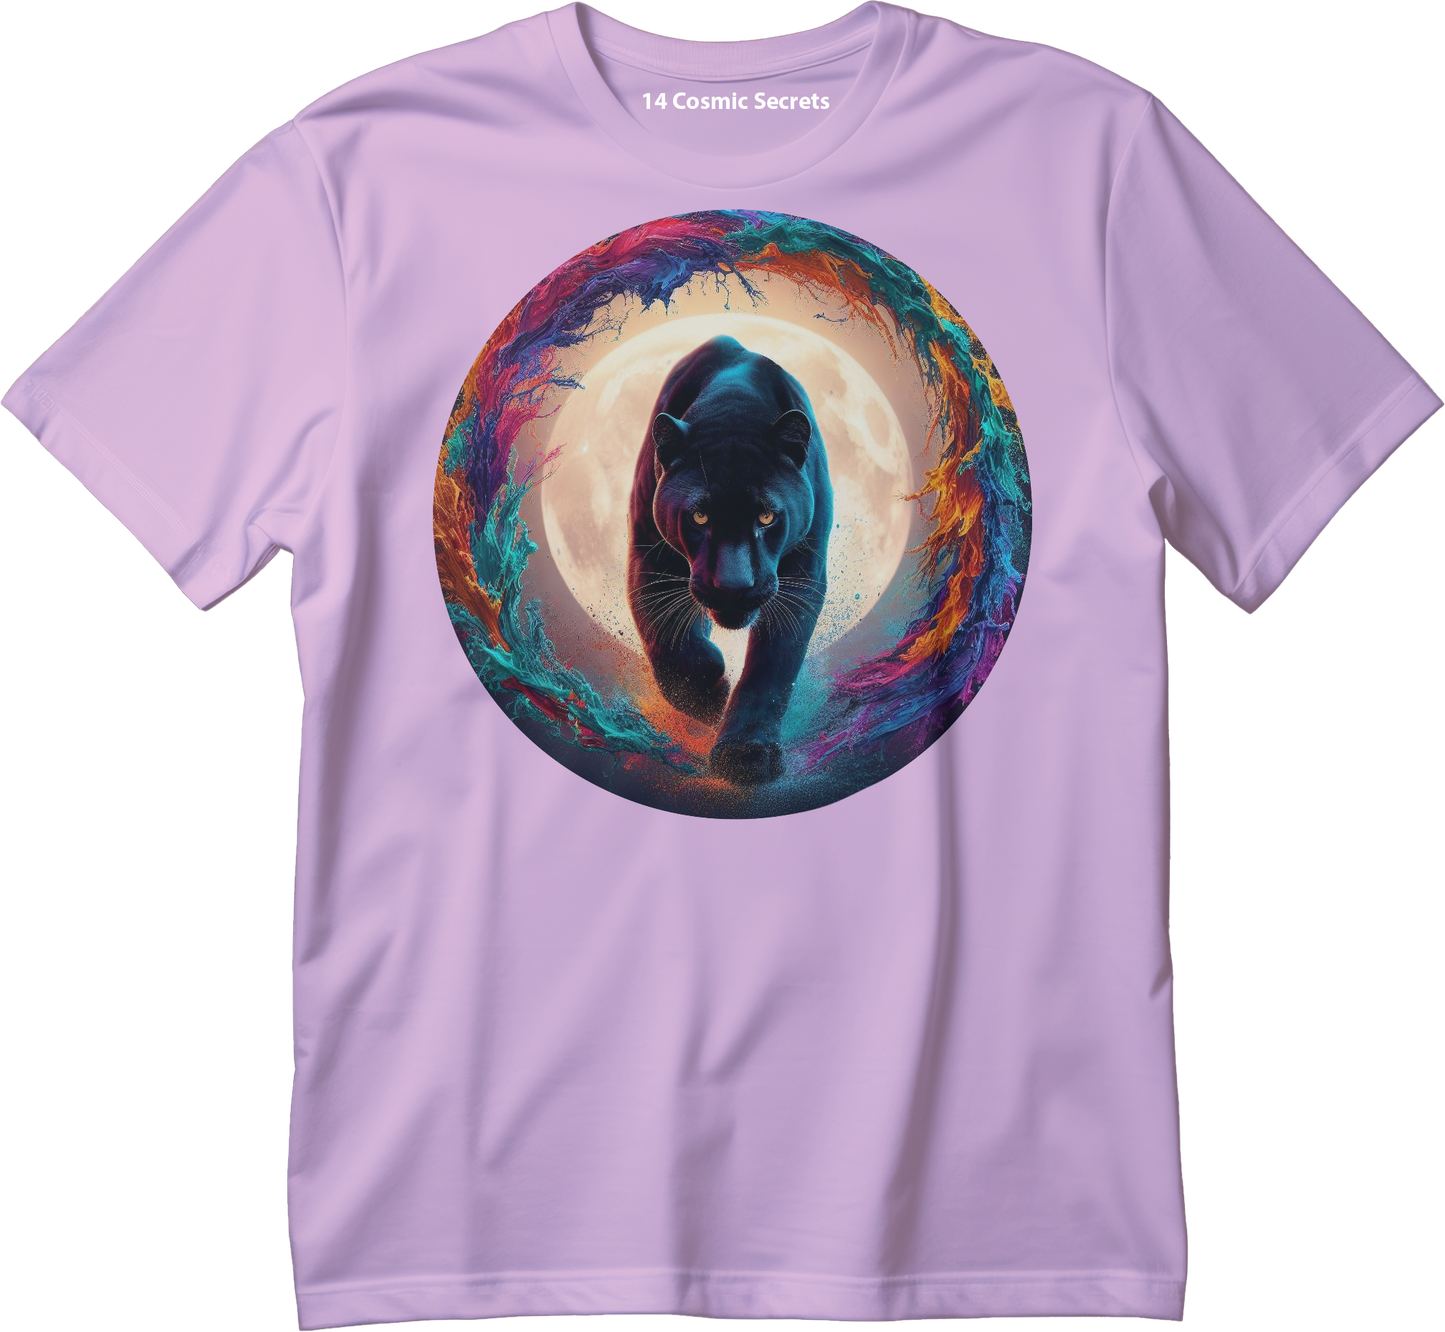 Black Panther on Prowl  Graphic Printed T-Shirt  Cotton T-Shirt Magnificence of India T-Shirt